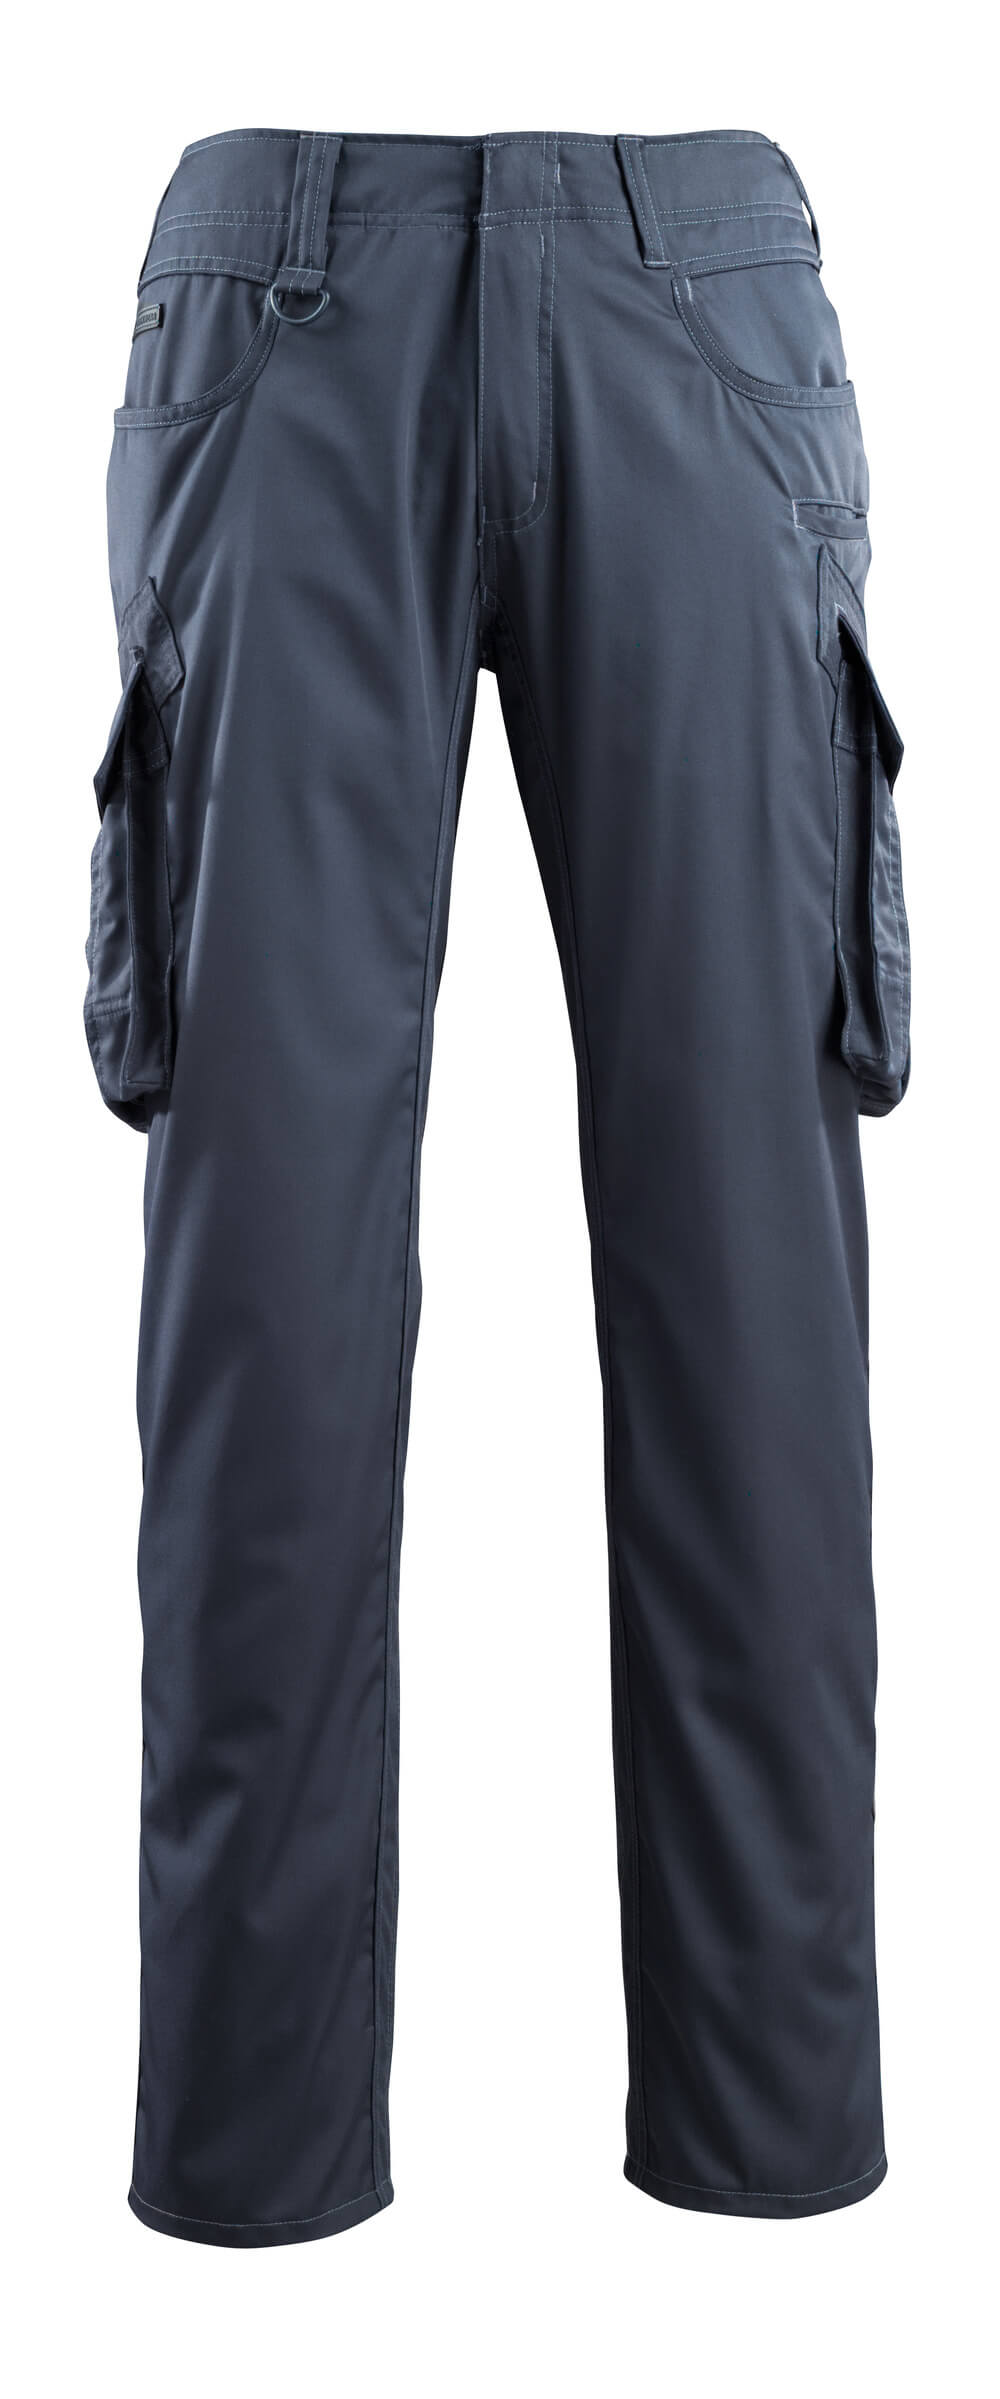 MASCOT®UNIQUE Trousers with thigh pockets Ingolstadt 16179 - DaltonSafety